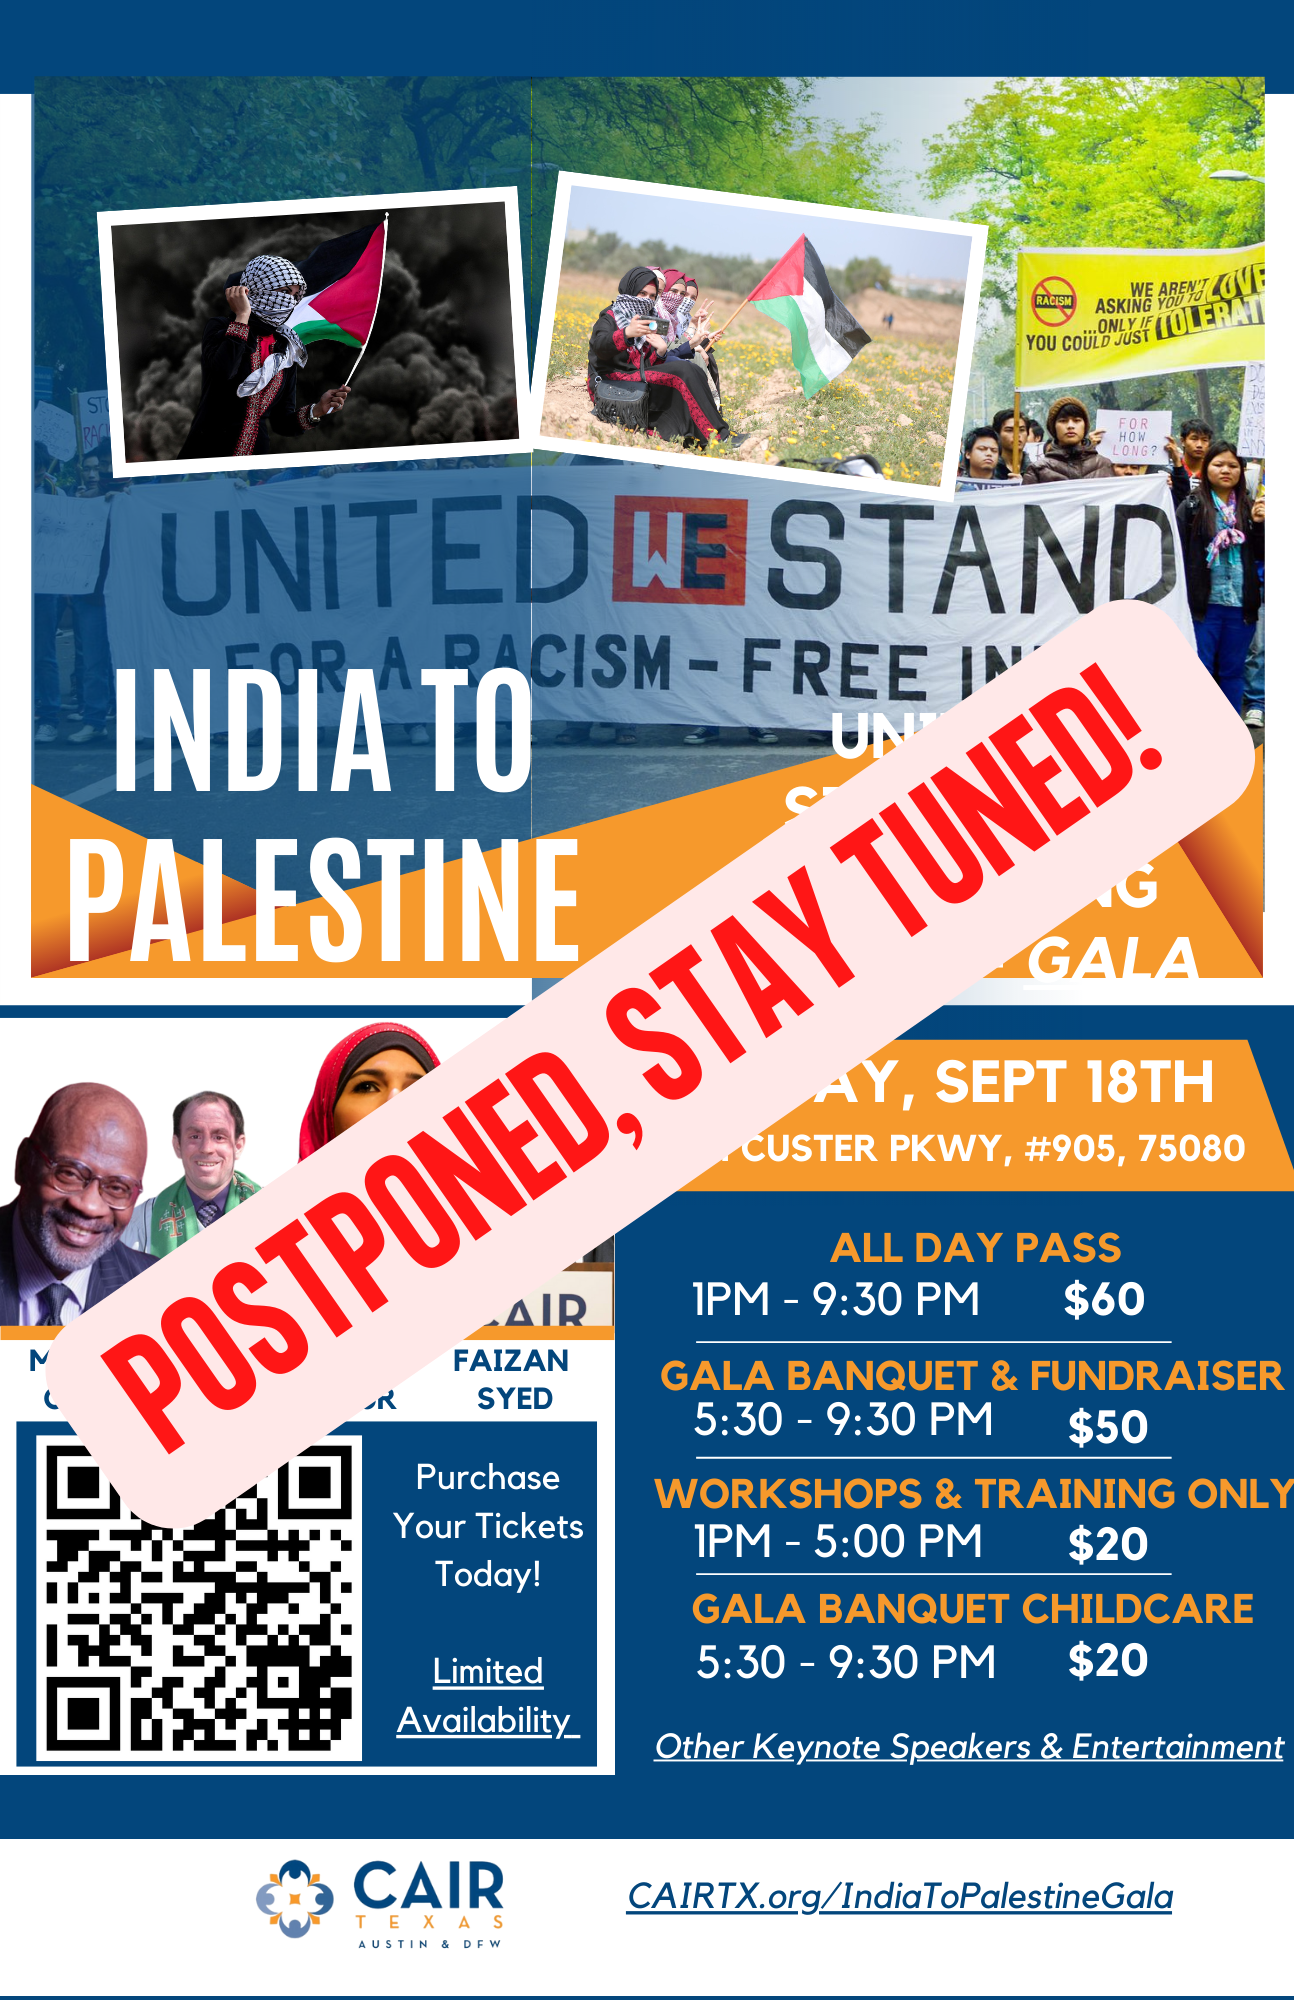 Uniting Struggles for Justice in India and Palestine - CAIR-Texas Dallas 